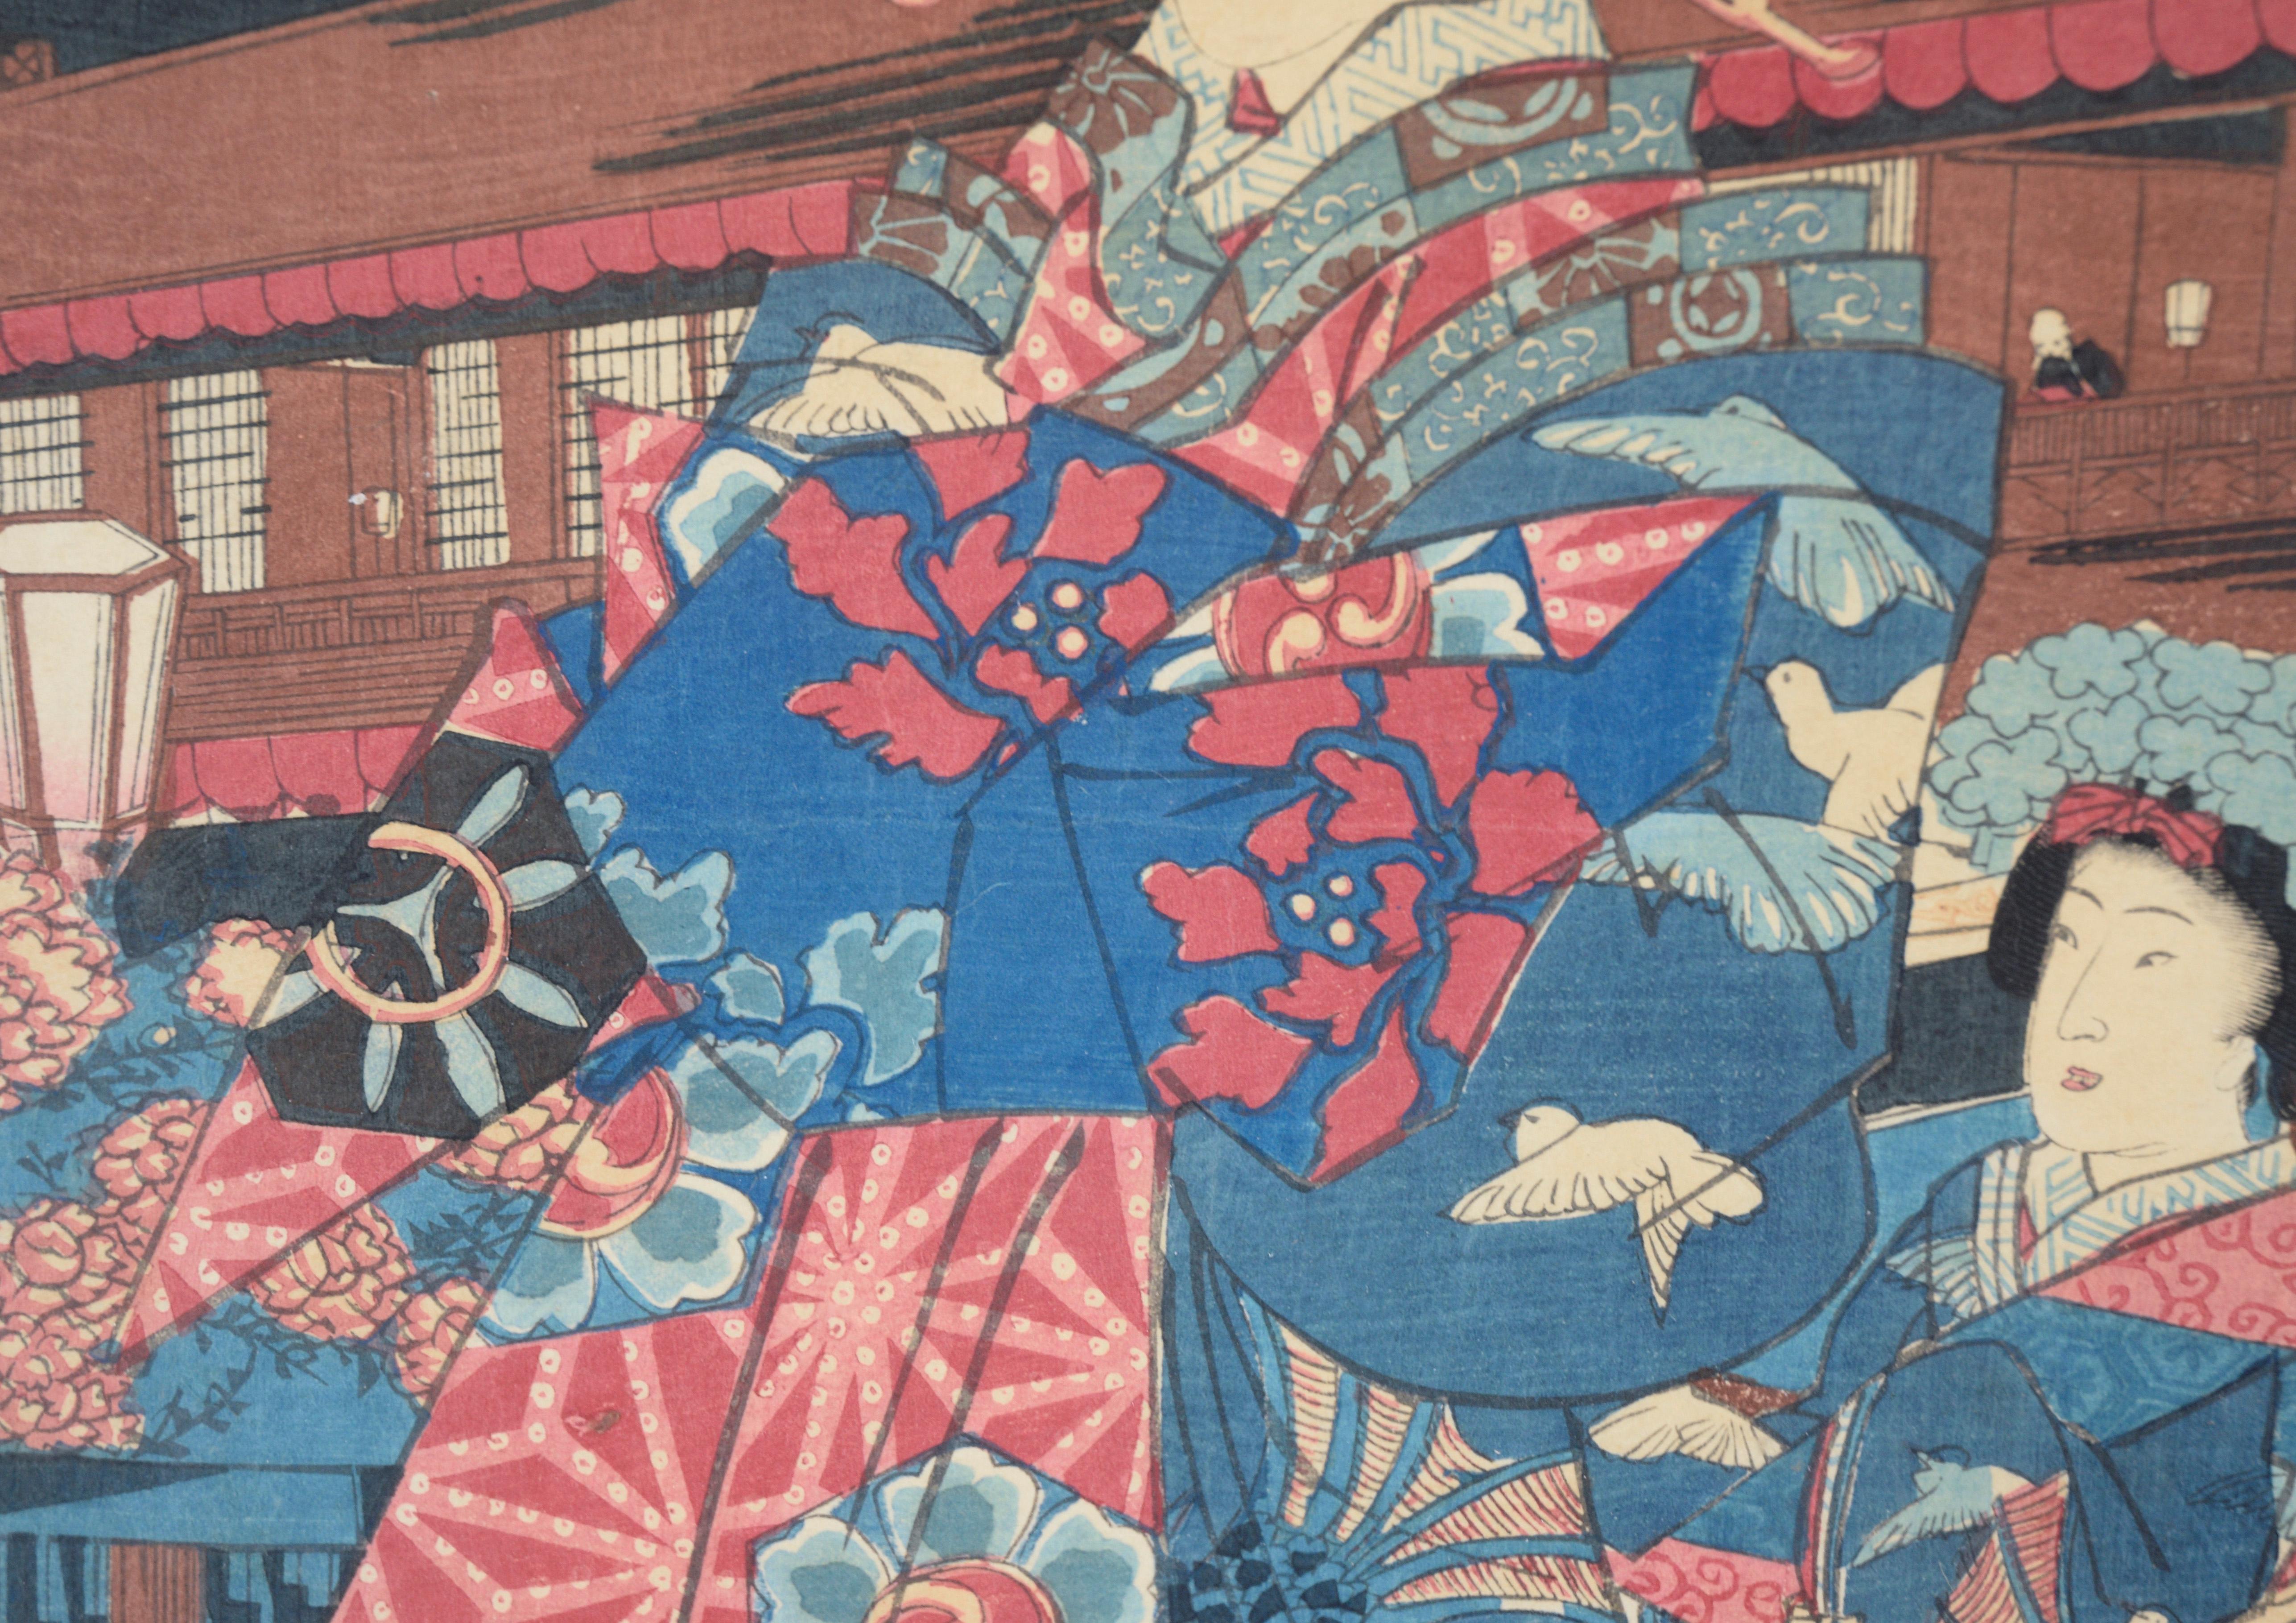 Courtesan at Yoshiwara Edomachi - Figurative Japanese Woodblock Print on Paper

Full color woodcut print of two women in elaborate gowns by Utagawa Yoshiiku (Ochiai Yoshiiku) (Japanese, 1833-1904). Two women are dressed in colorful robes with